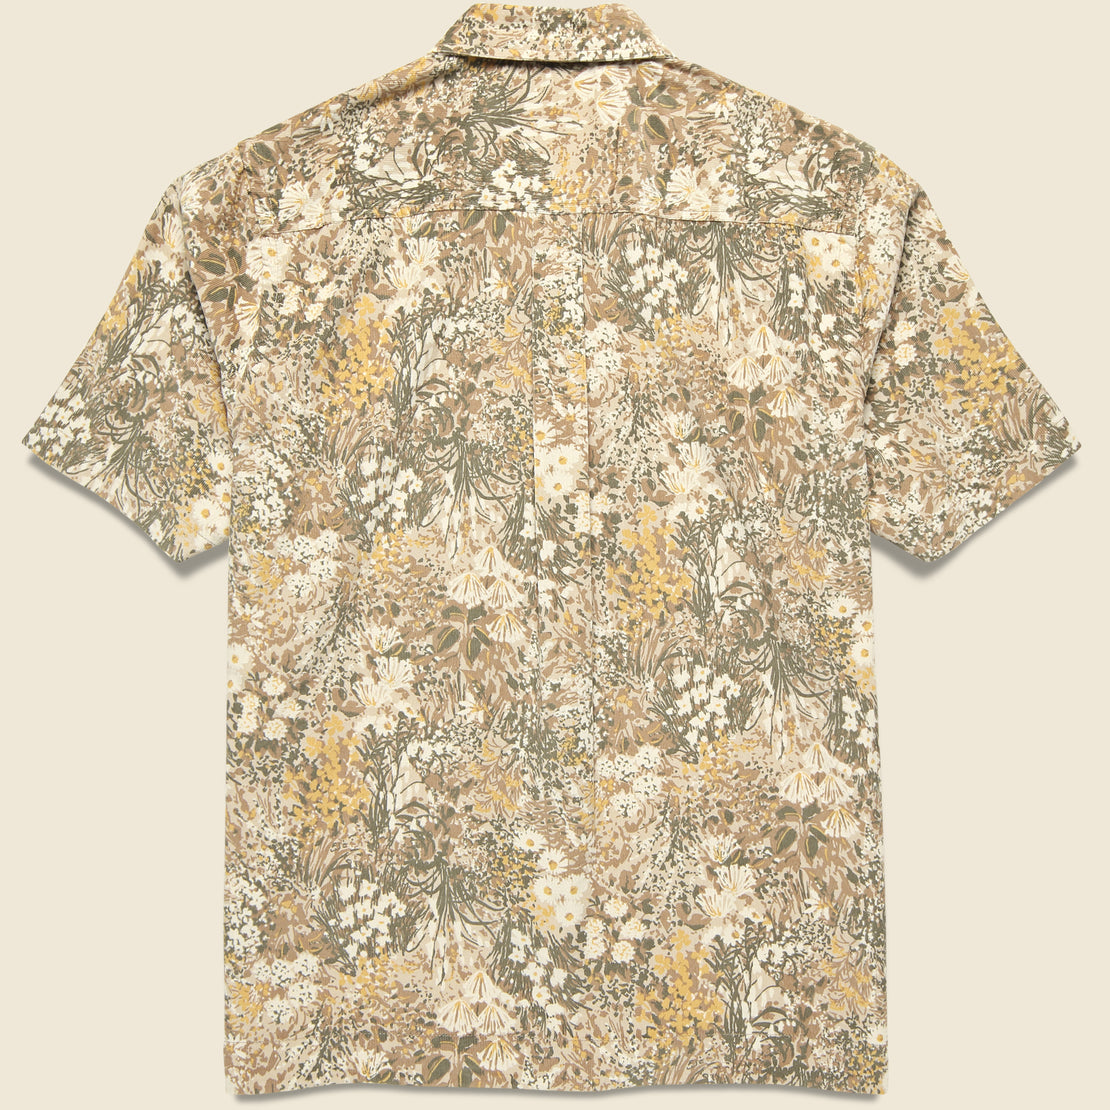 Garden Cord Tech Overshirt - Sand - Universal Works - STAG Provisions - Tops - S/S Woven - Floral